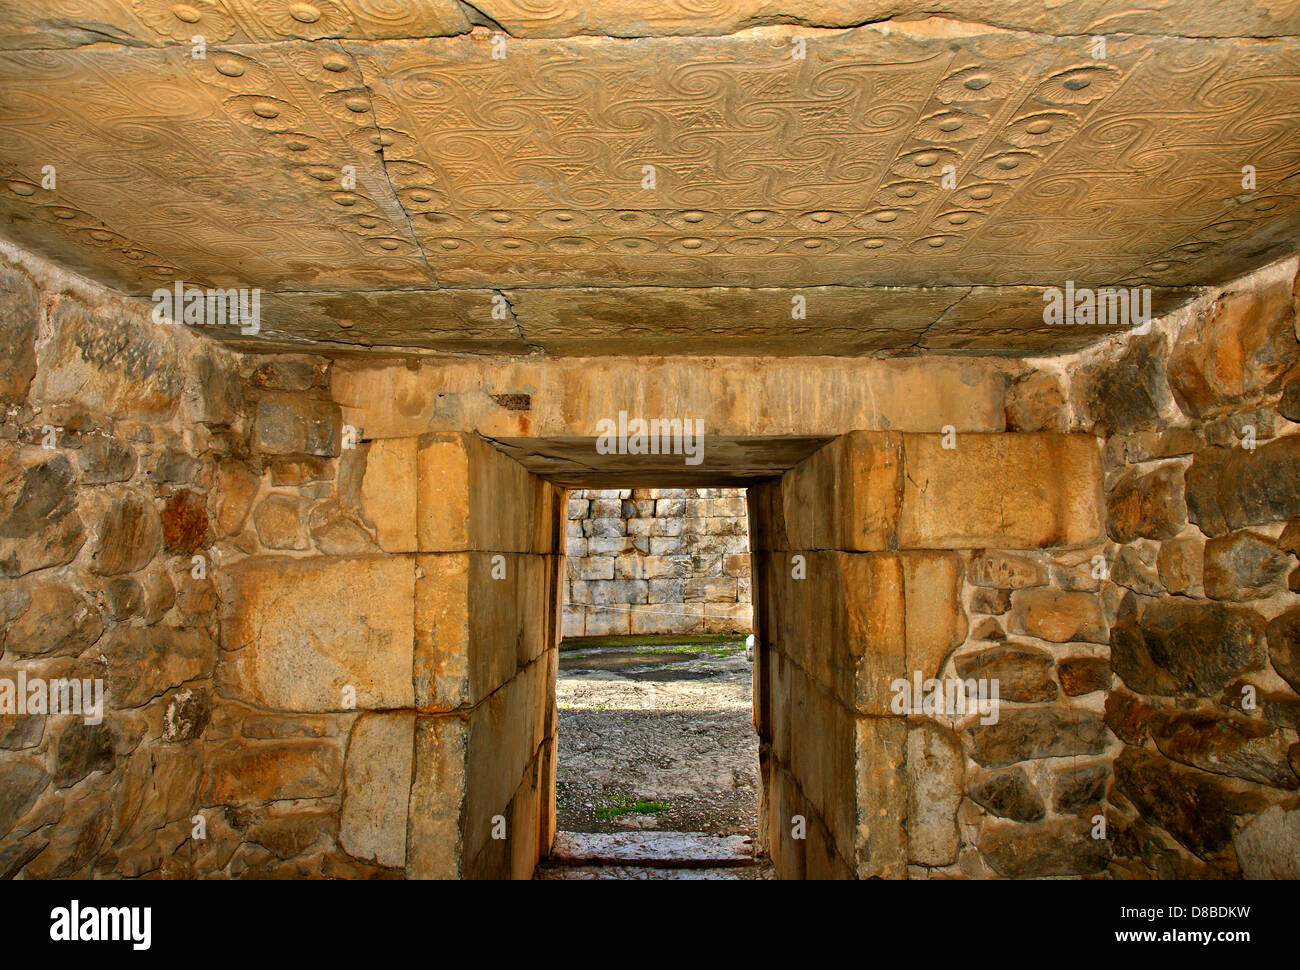 The inner chamber of the Tholos tomb of Minyas (around 1250 BC) , Orchomenos ('Orchomenus'),  Viotia, Central Greece. Stock Photo